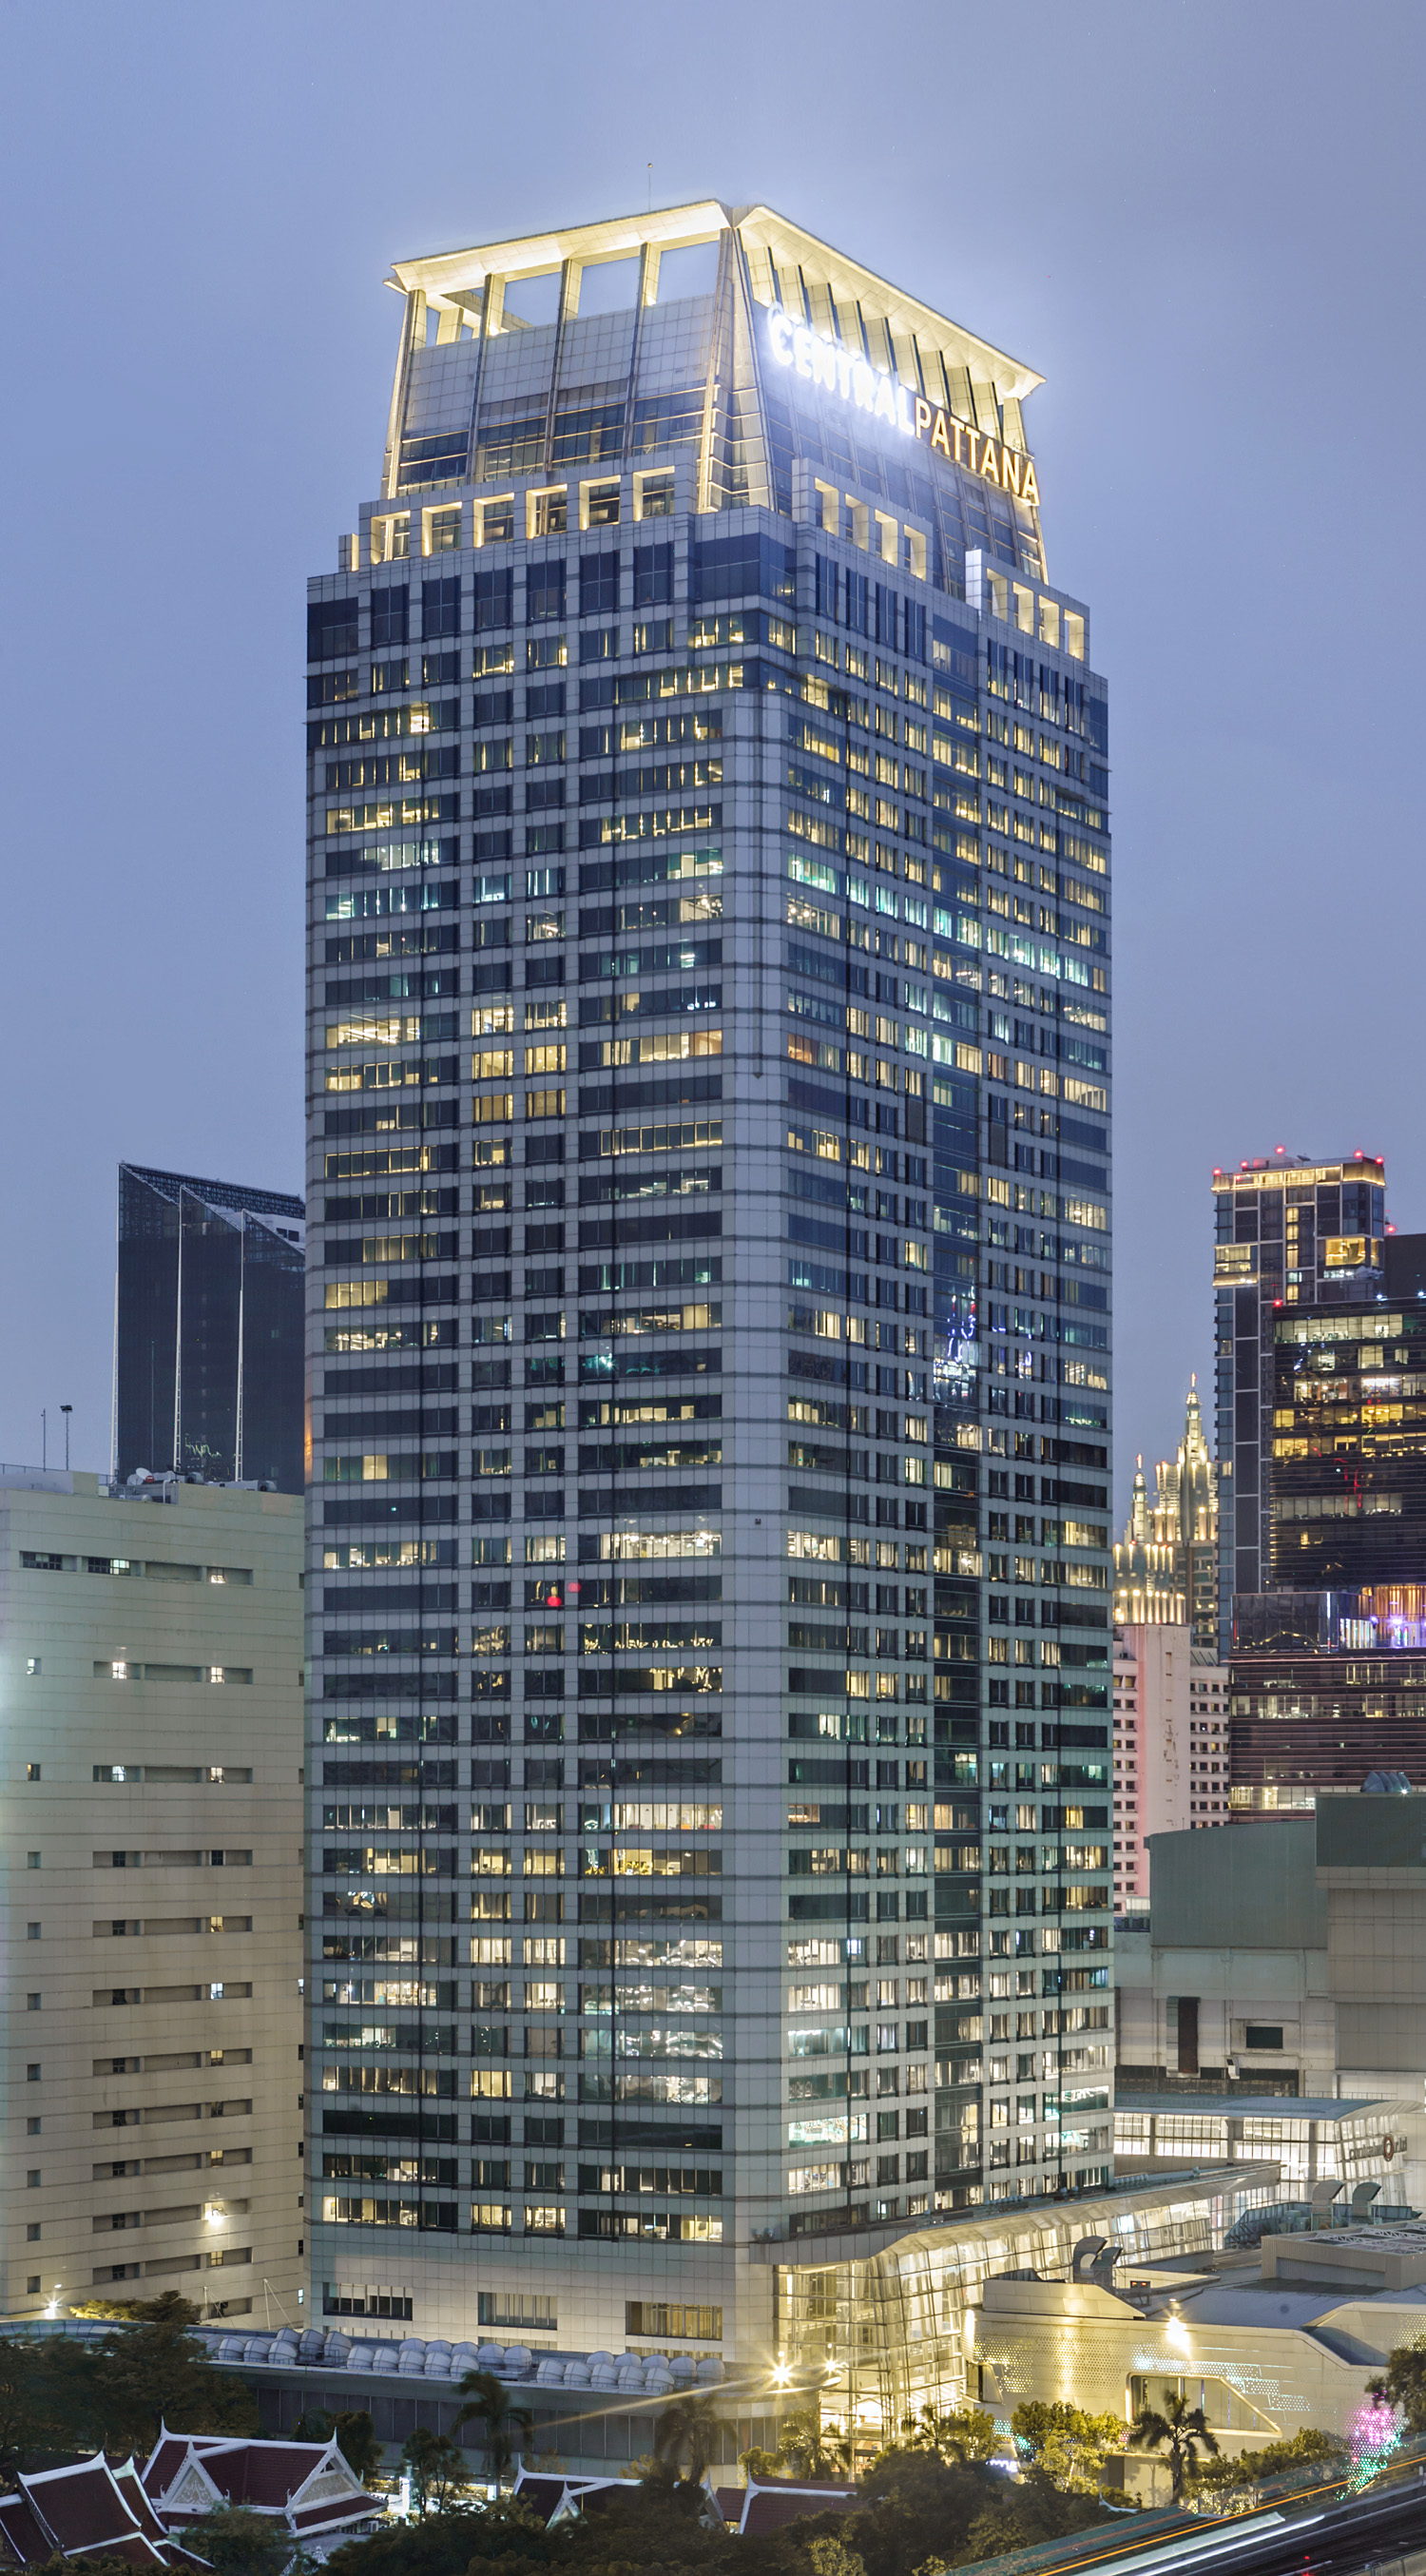 The Offices at CentralWorld, Bangkok - View from Novotel Bangkok on Siam Square. © Mathias Beinling